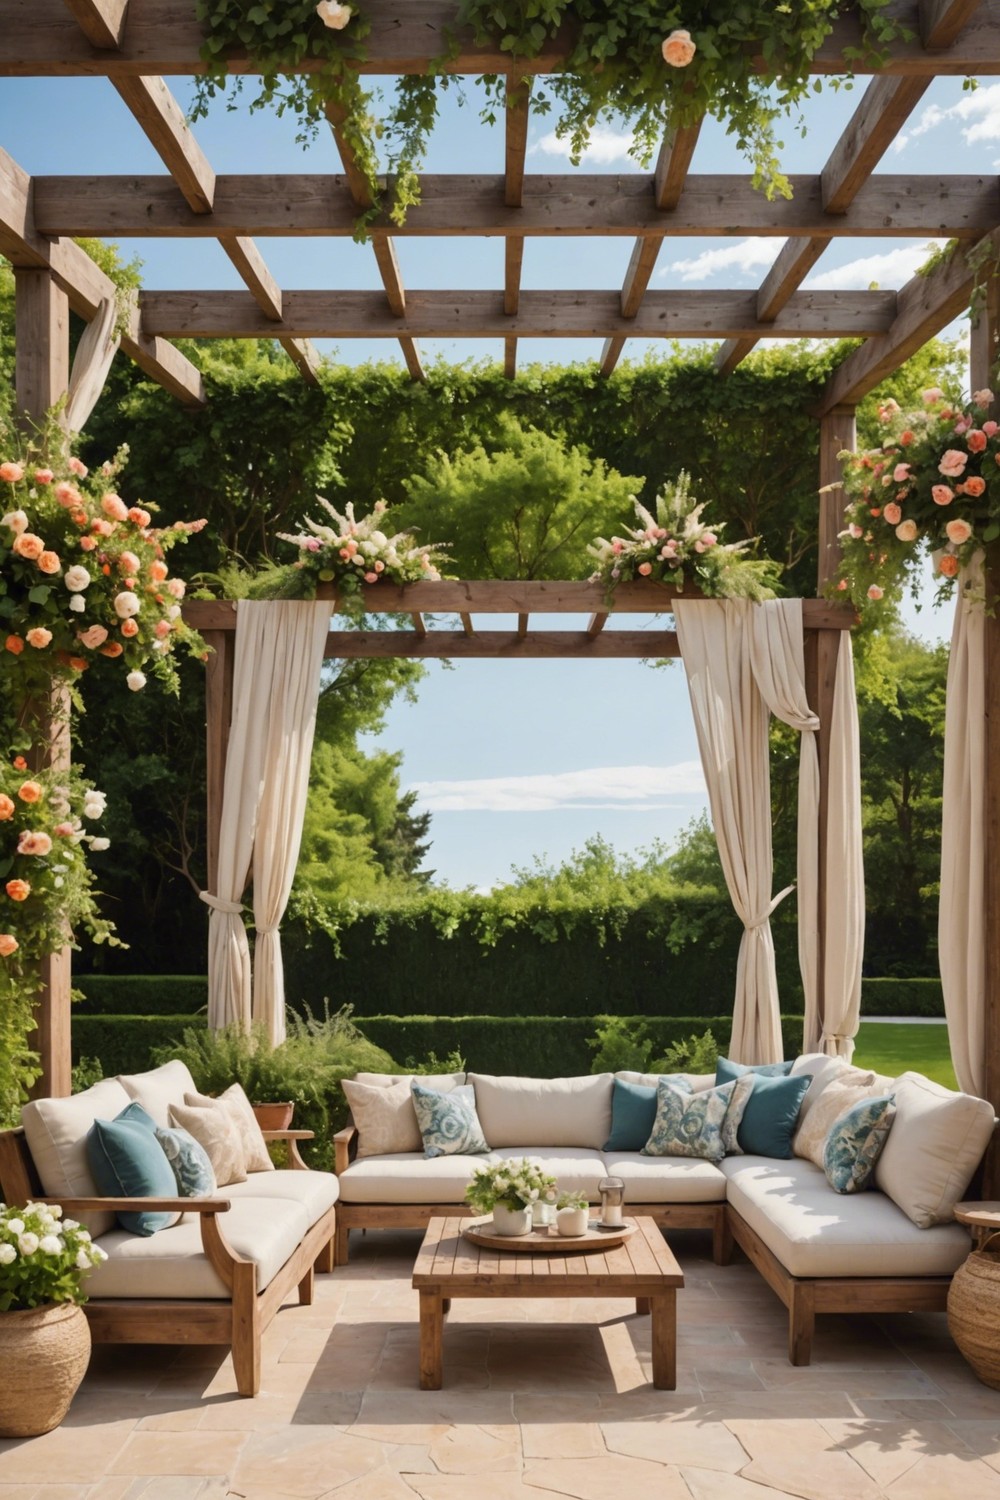 Fabric-Covered Pergola for Outdoor Seating